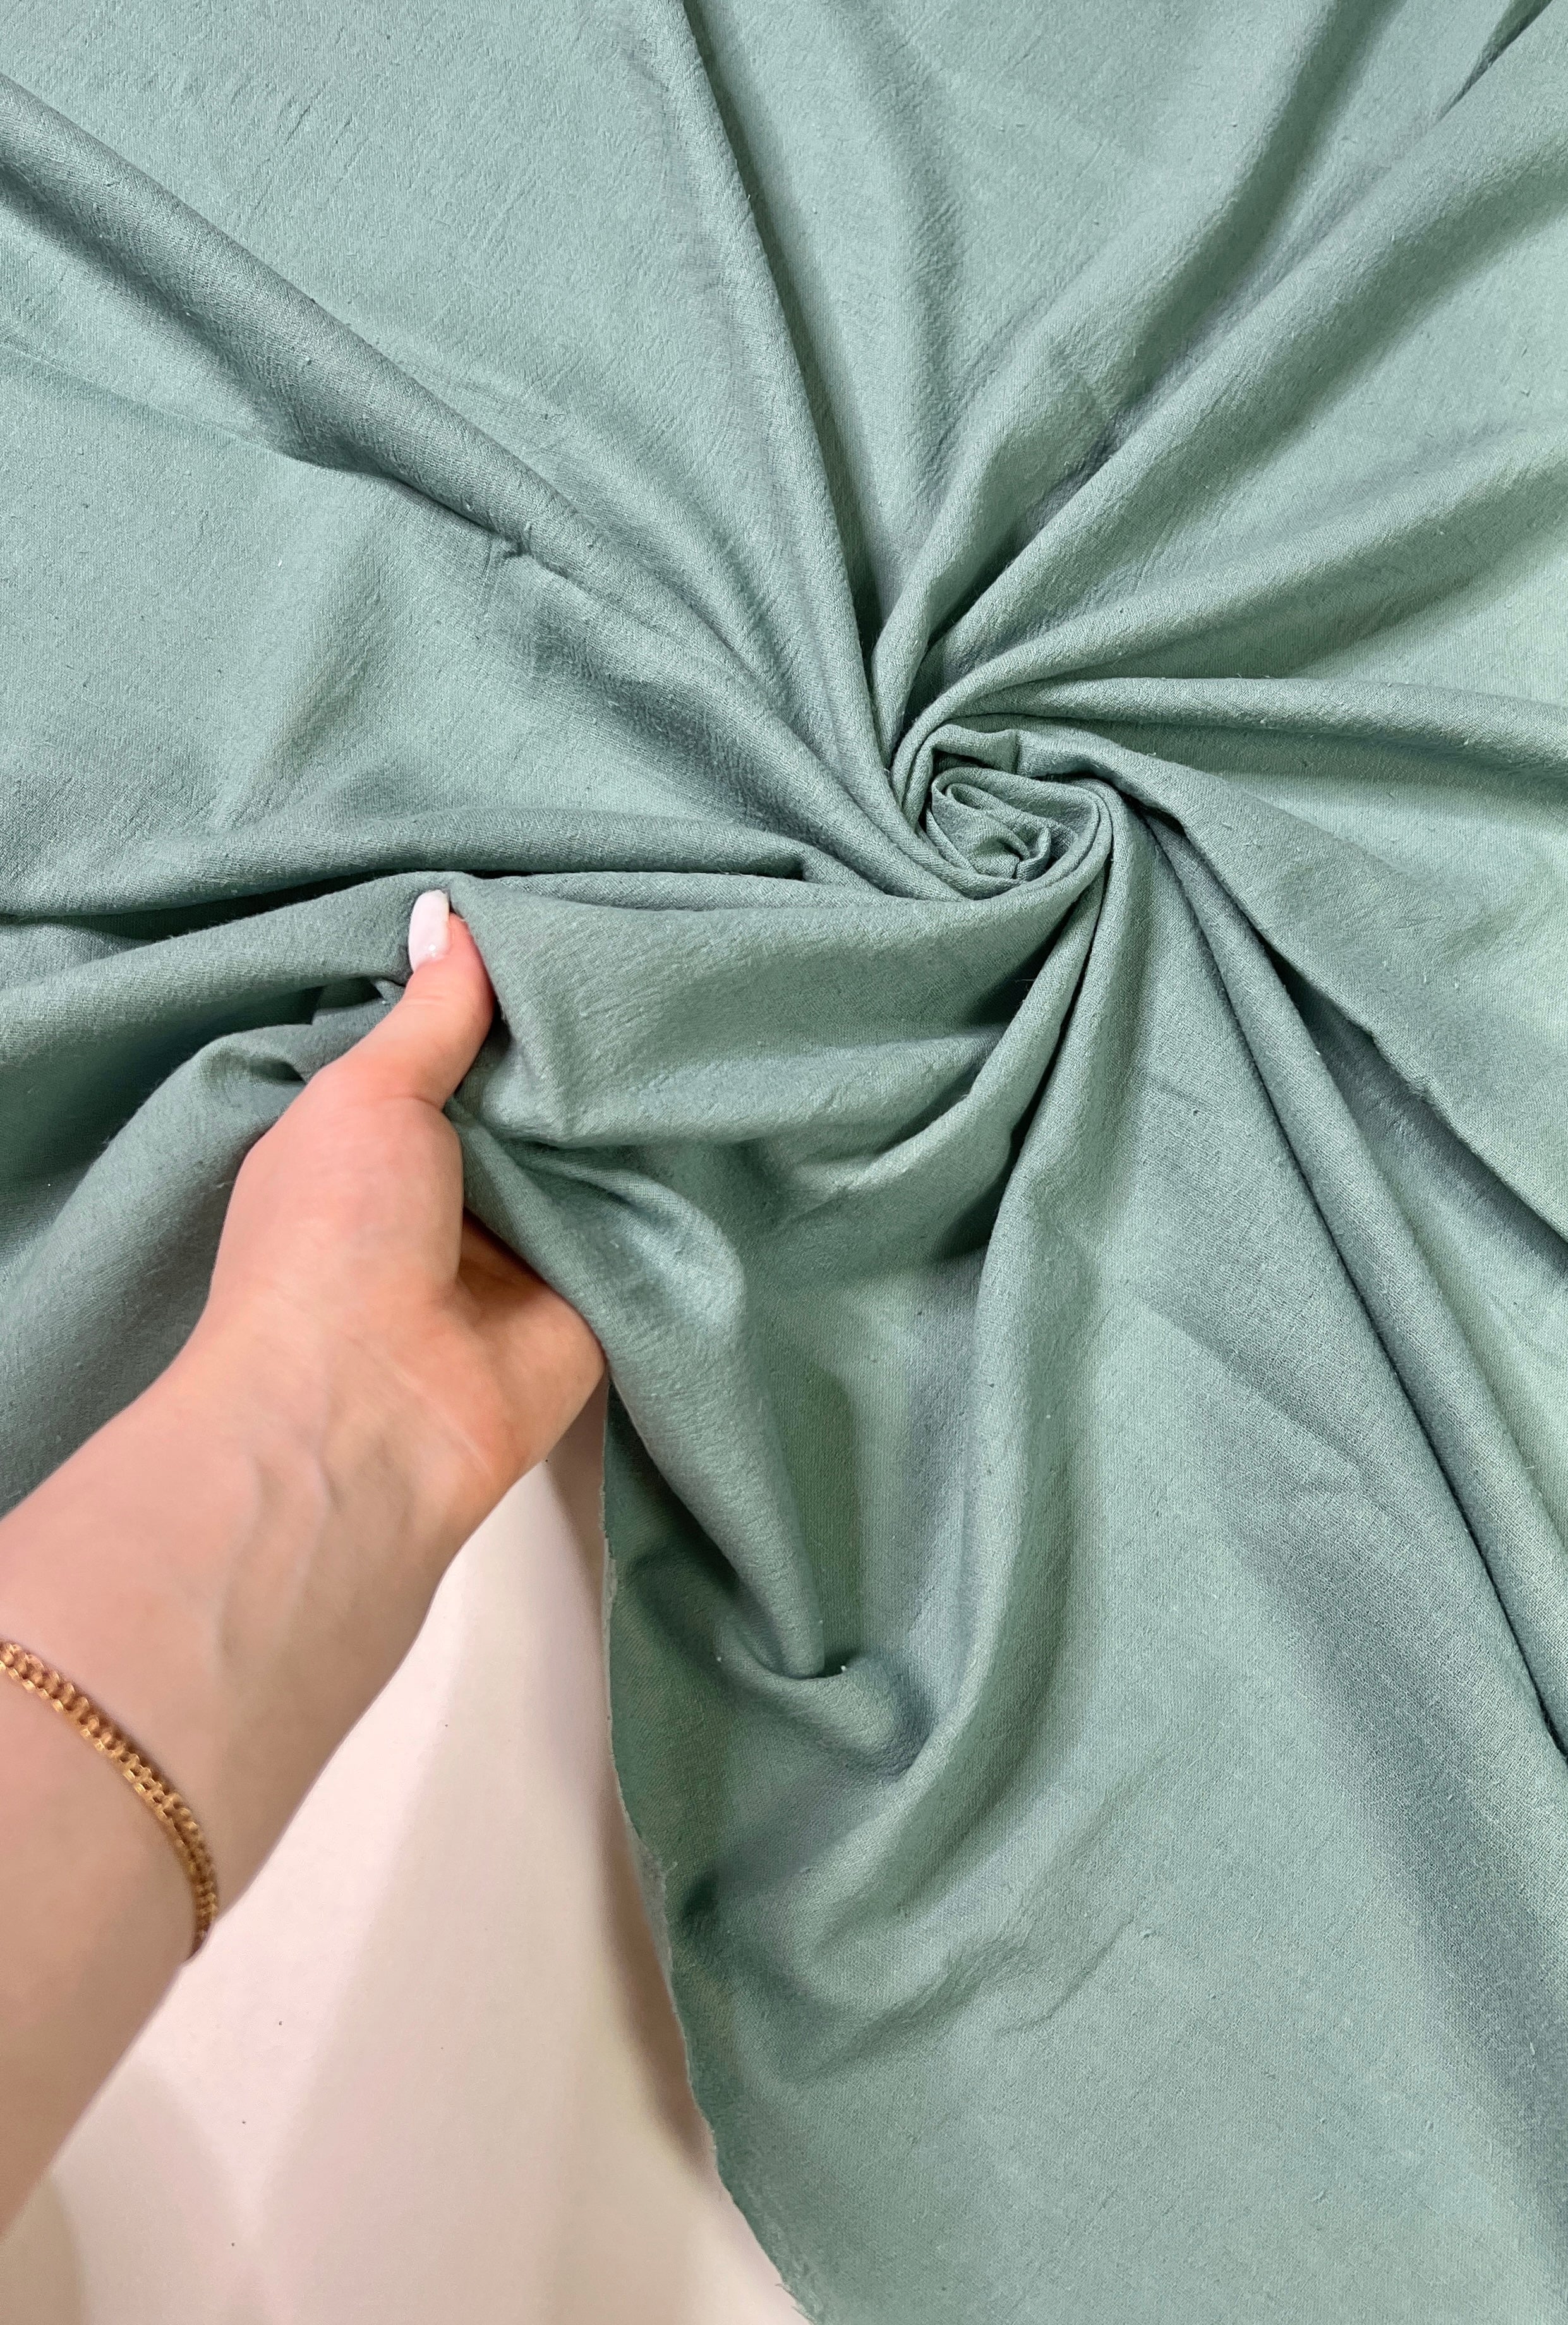 forest Green Cotton Gauze, cotton gauze fabric, green gauze fabric, dark green gauze, cotton for woman, double gauze light green, coton gauze for bride, cotton gauze in low price